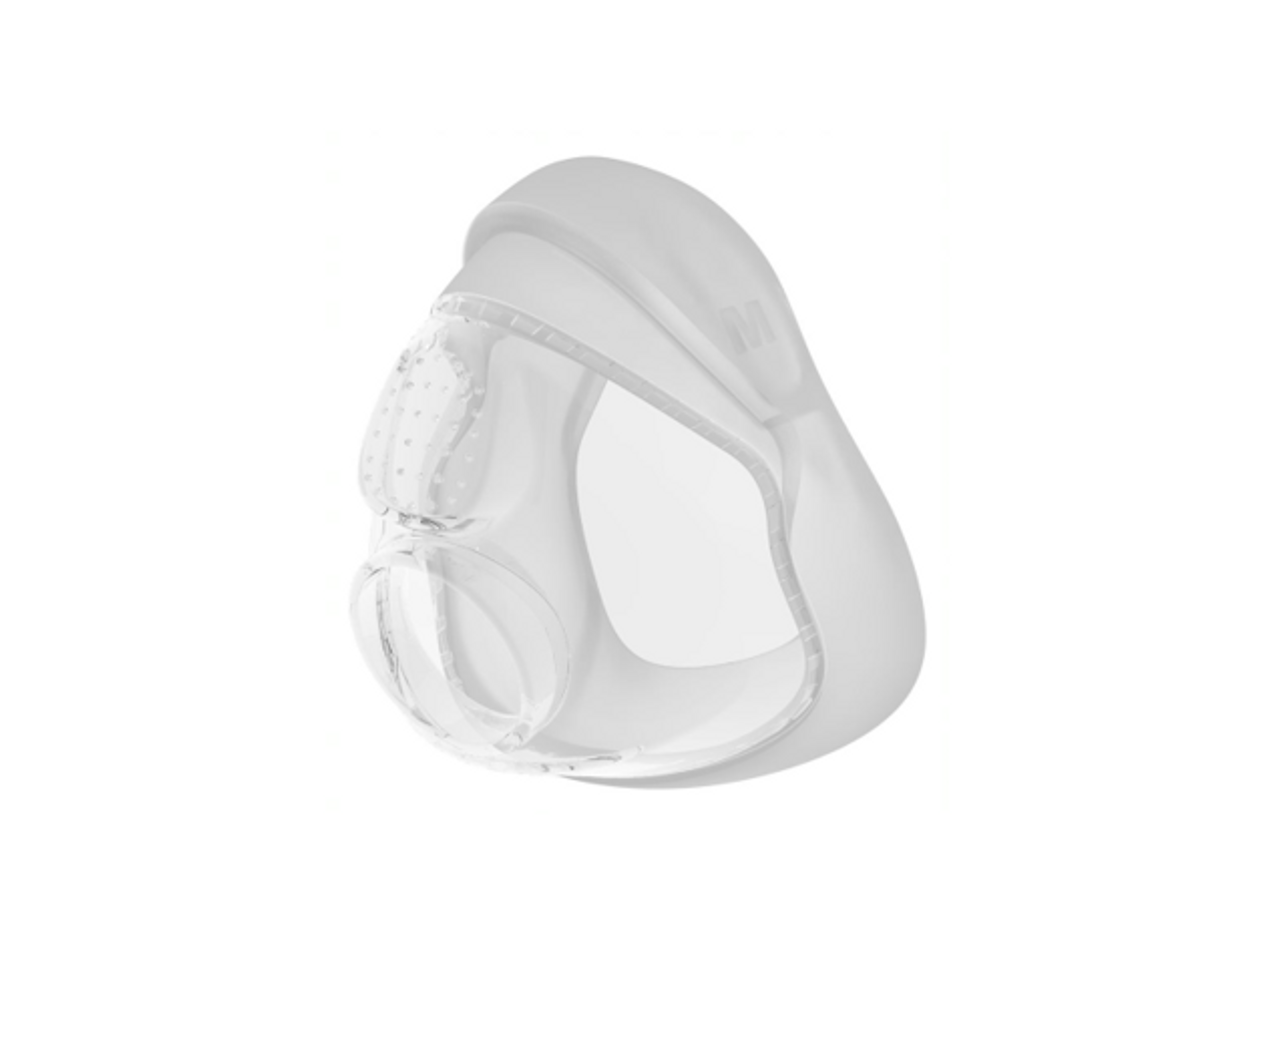 Product Image Simplus Full Face Mask Seal